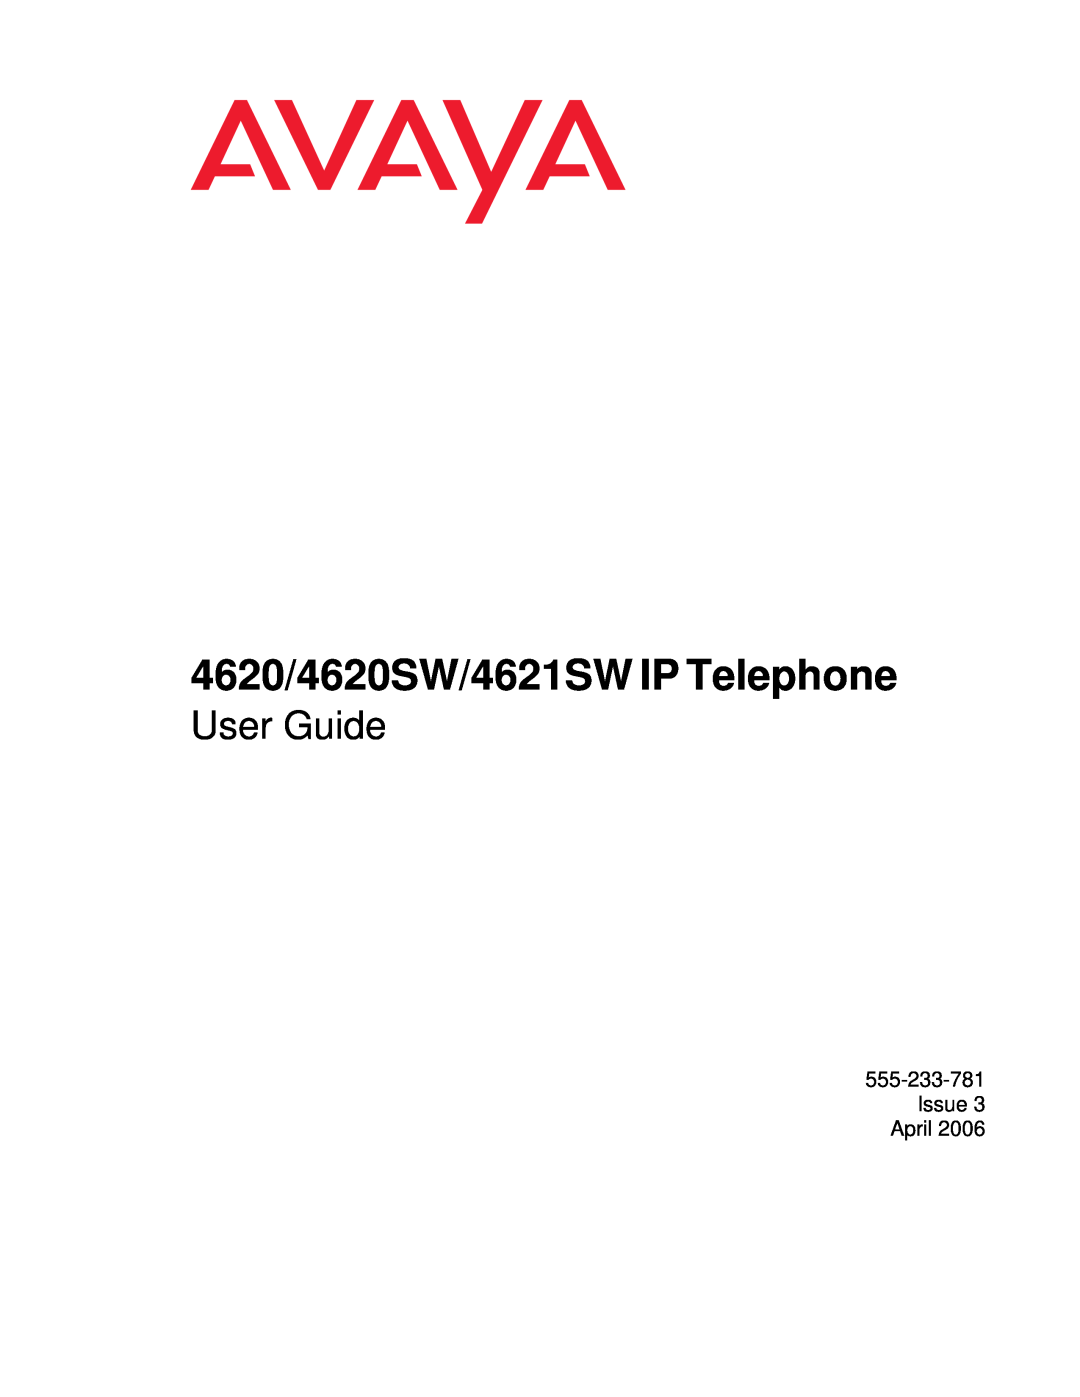 Avaya manual 4620/4620SW/4621SW IP Telephone, User Guide, Issue 3 April 